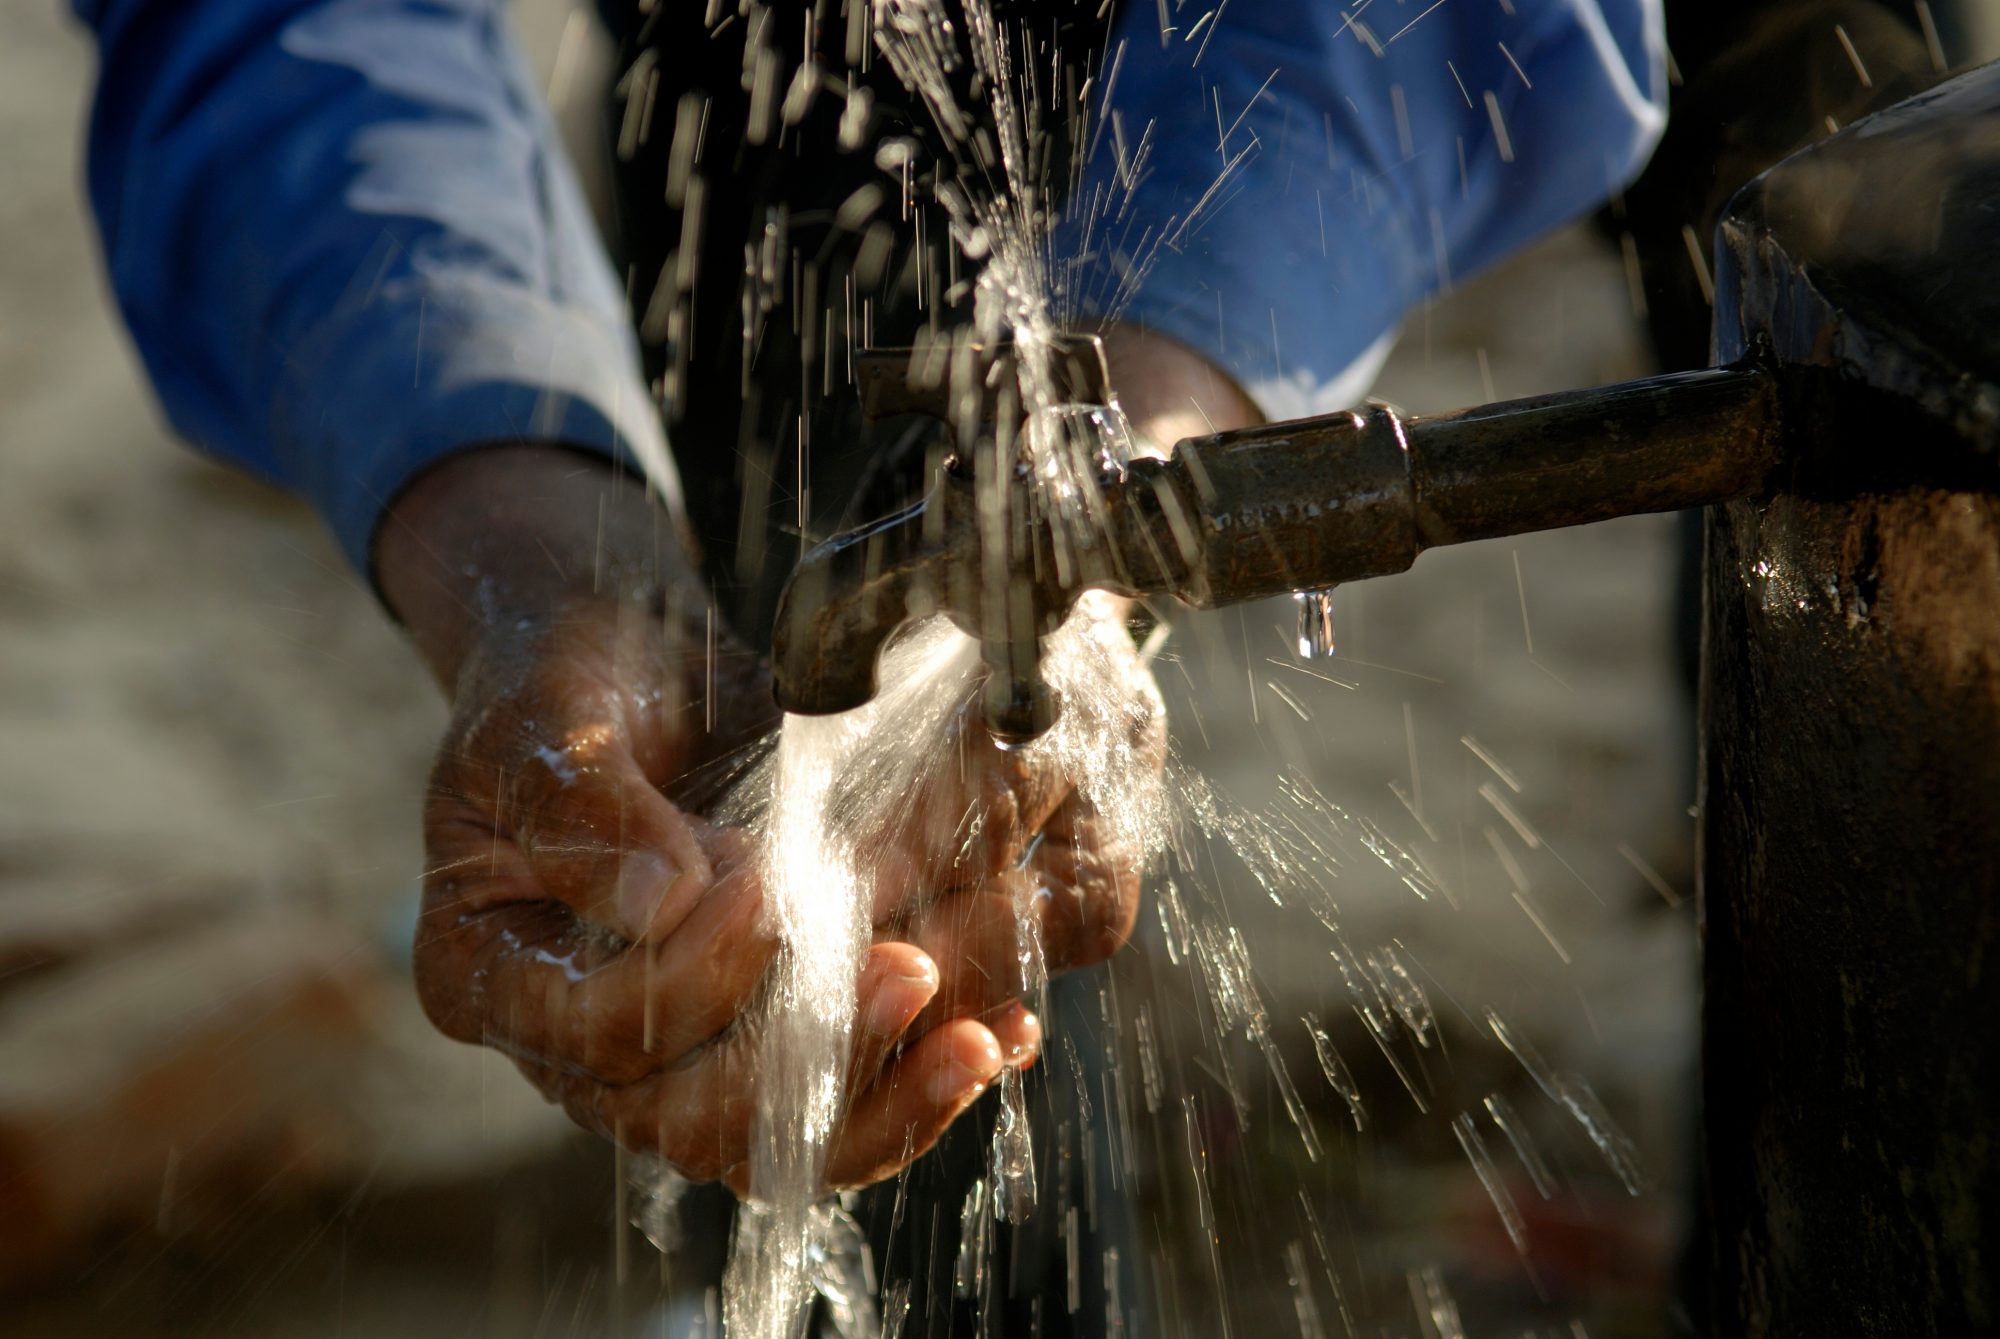 A man washing his hands at an outdoor faucet